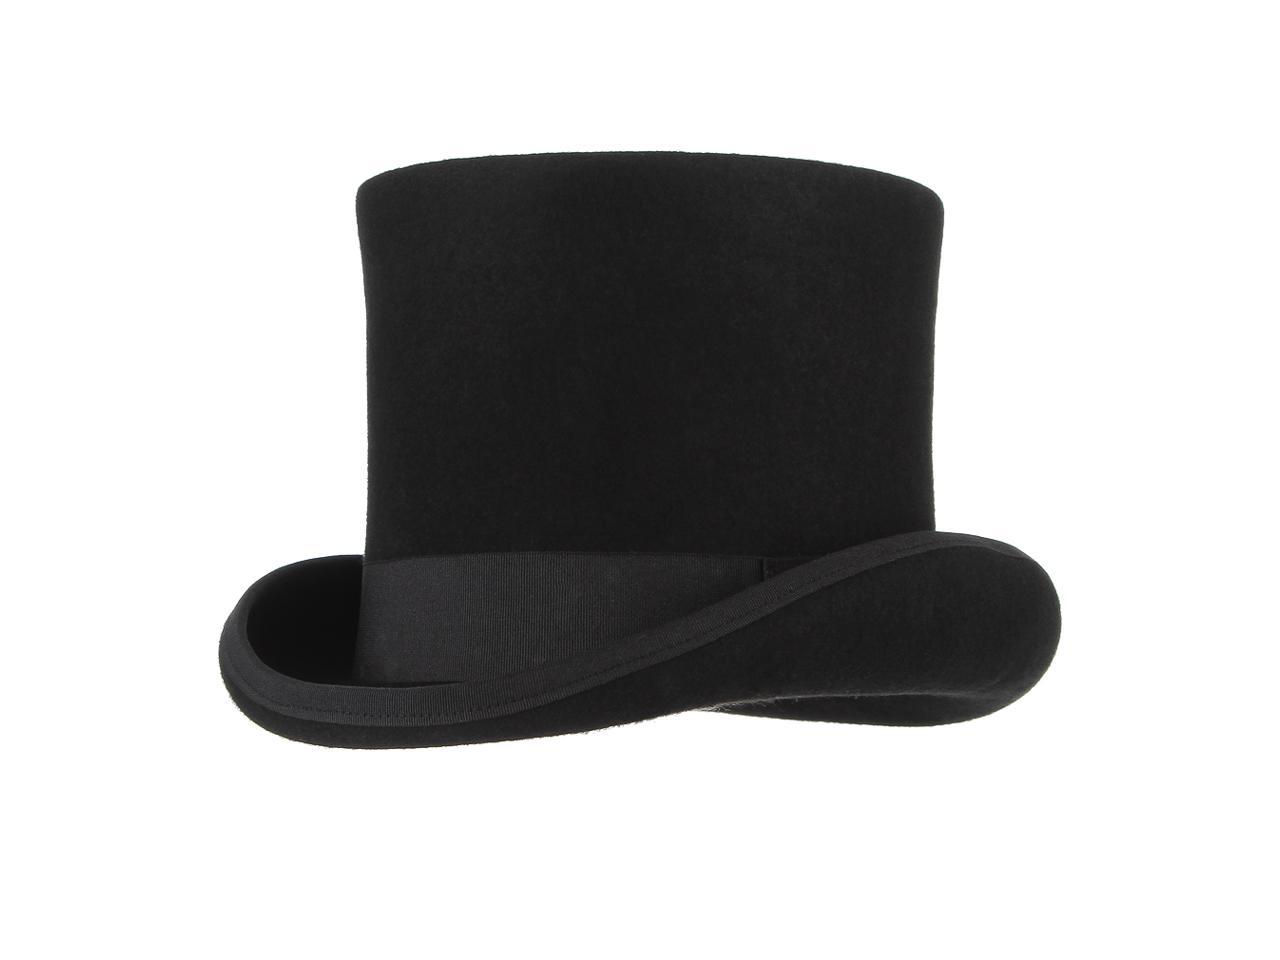 Boxed HAND MADE TOP HAT 100% WOOL Felt Satin Wedding Party Event